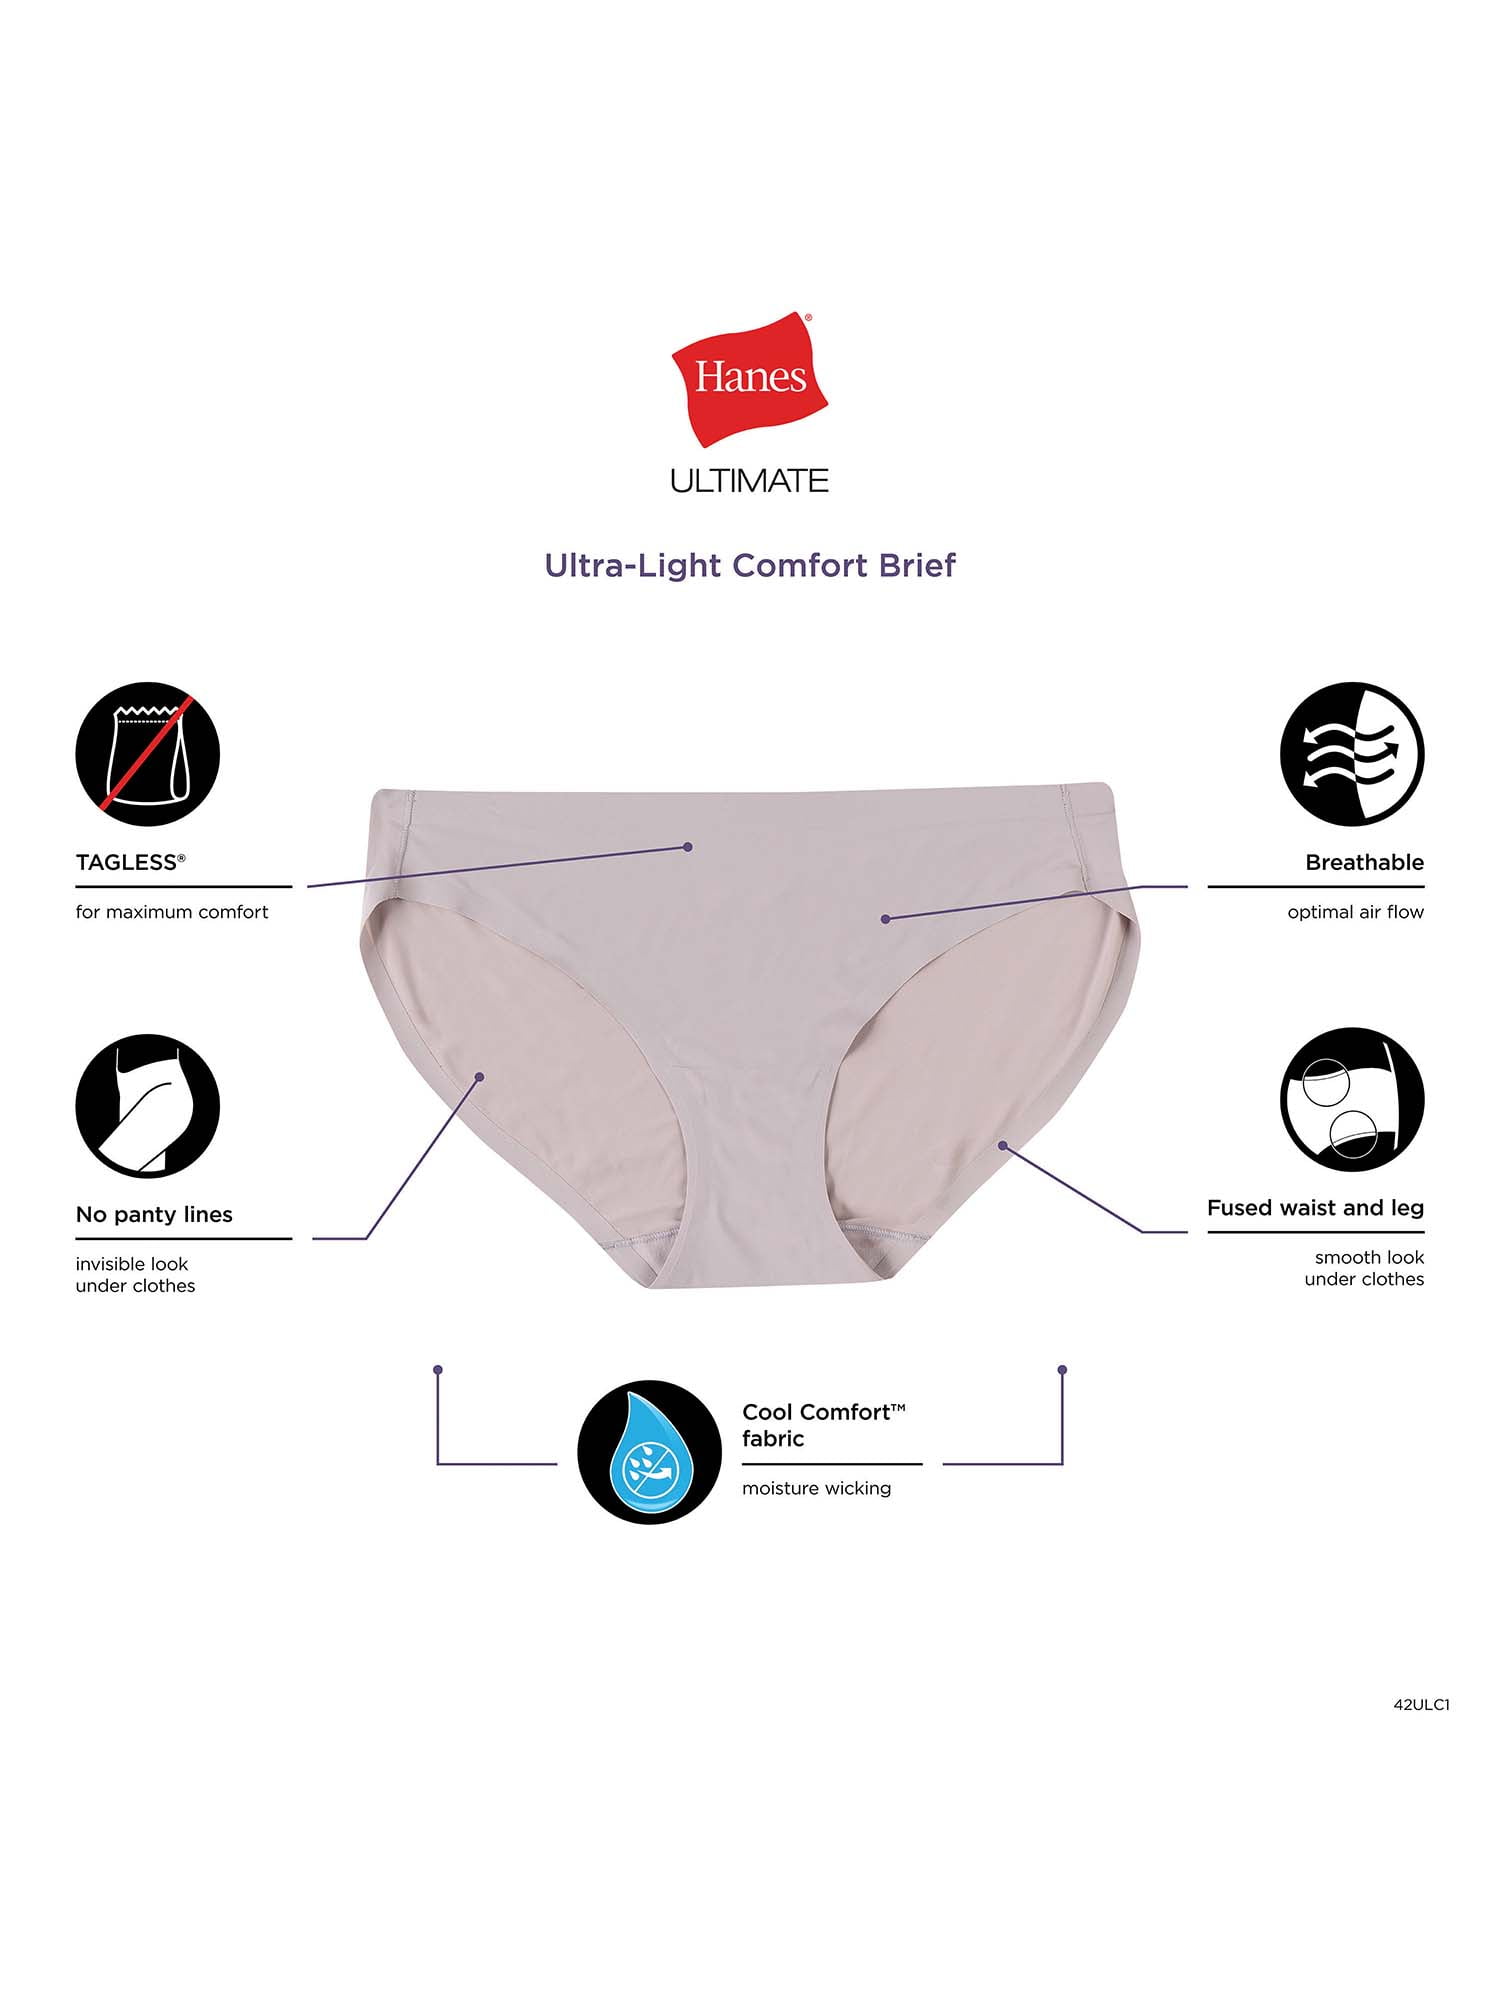 BENCHBody underwear is made from light, seamless, breathable